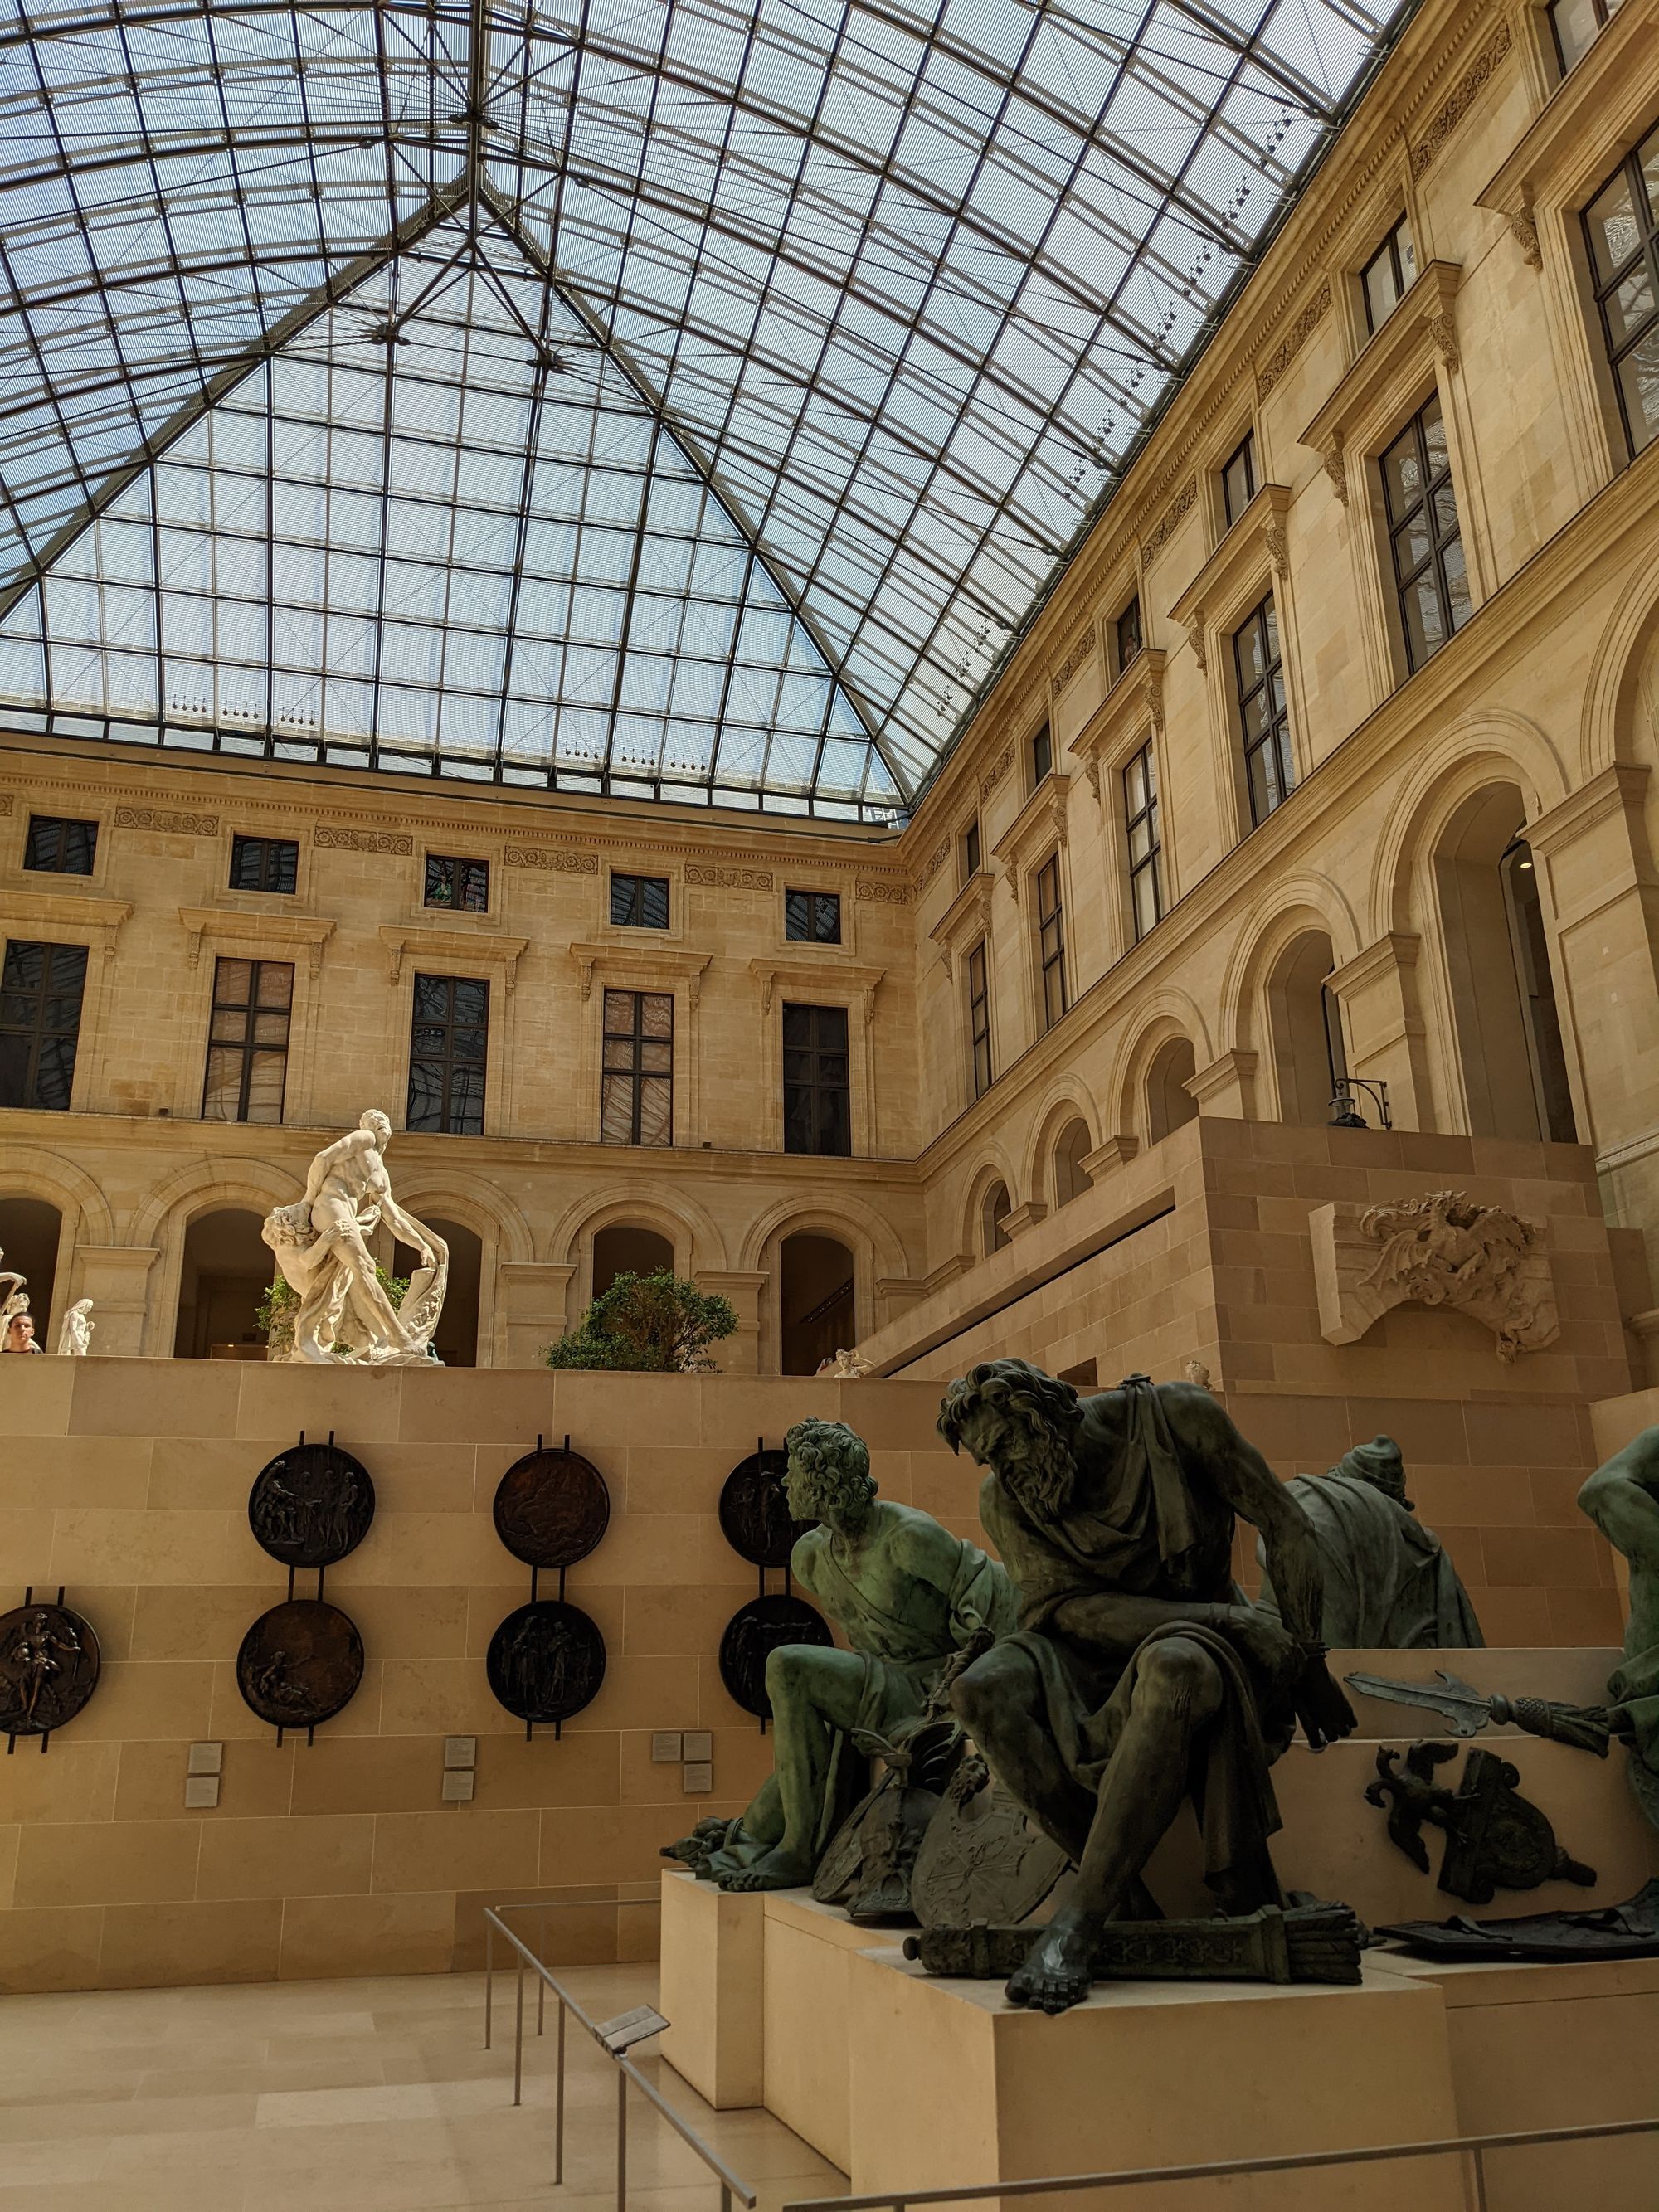 Statues inside the Louvre Museum at Paris in 2022